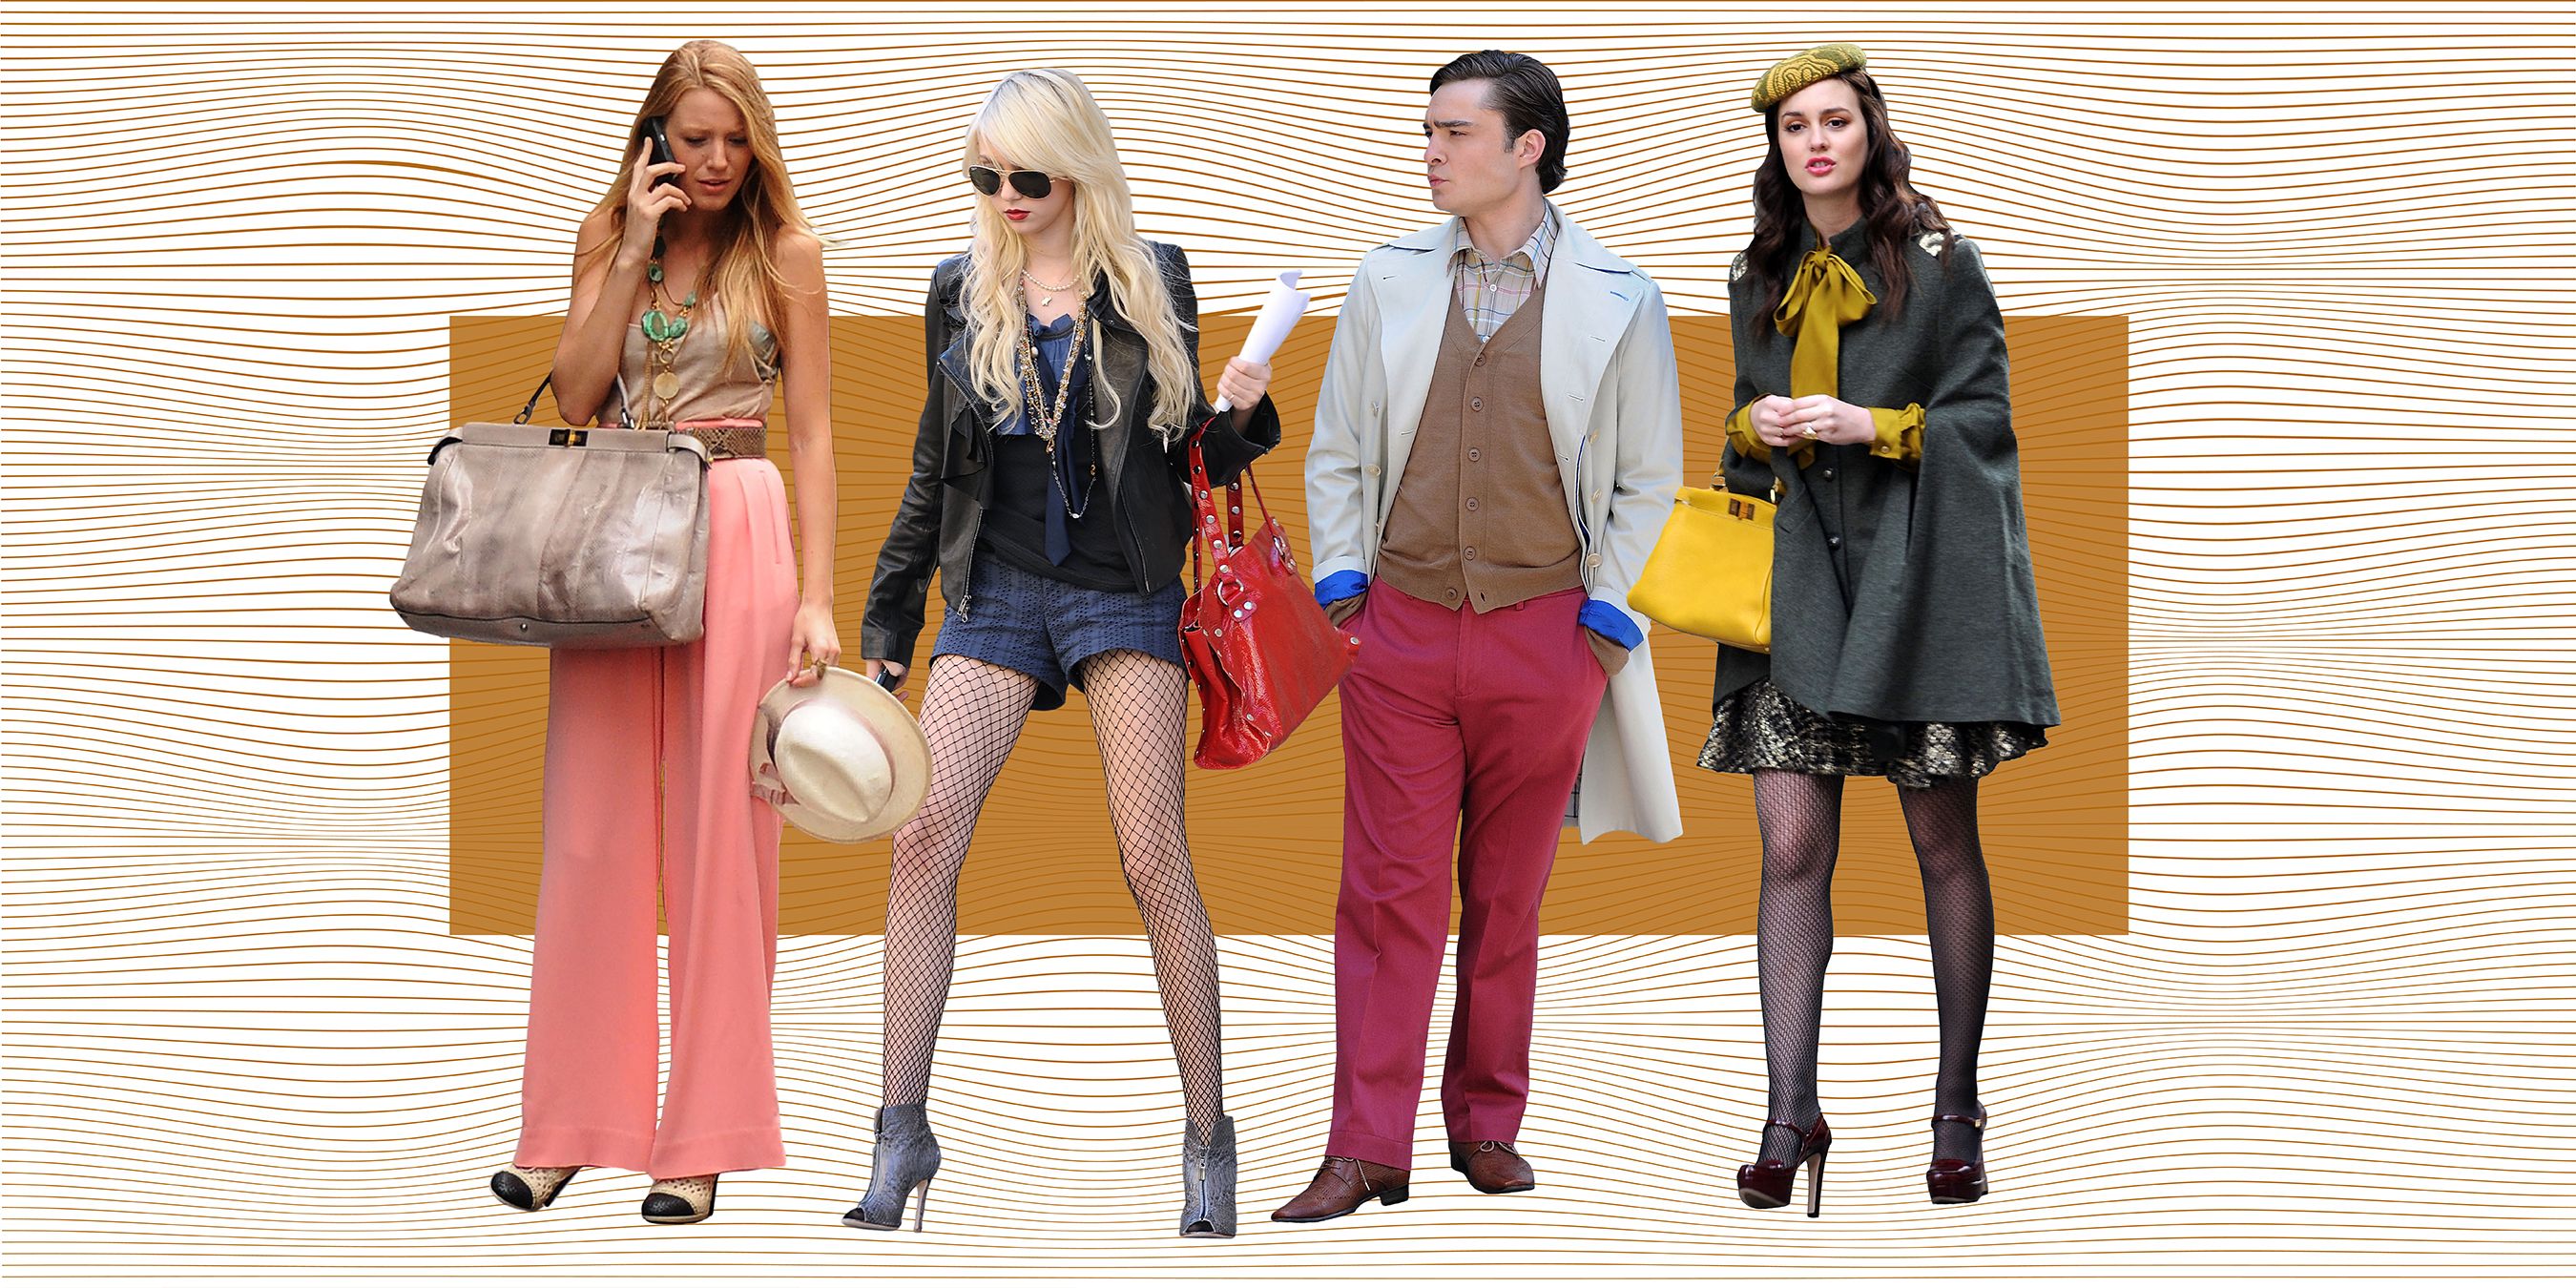 9 Halloween Costume Ideas Inspired by the Original 'Gossip Girl' - How to  Recreate Gossip Girl Outfits